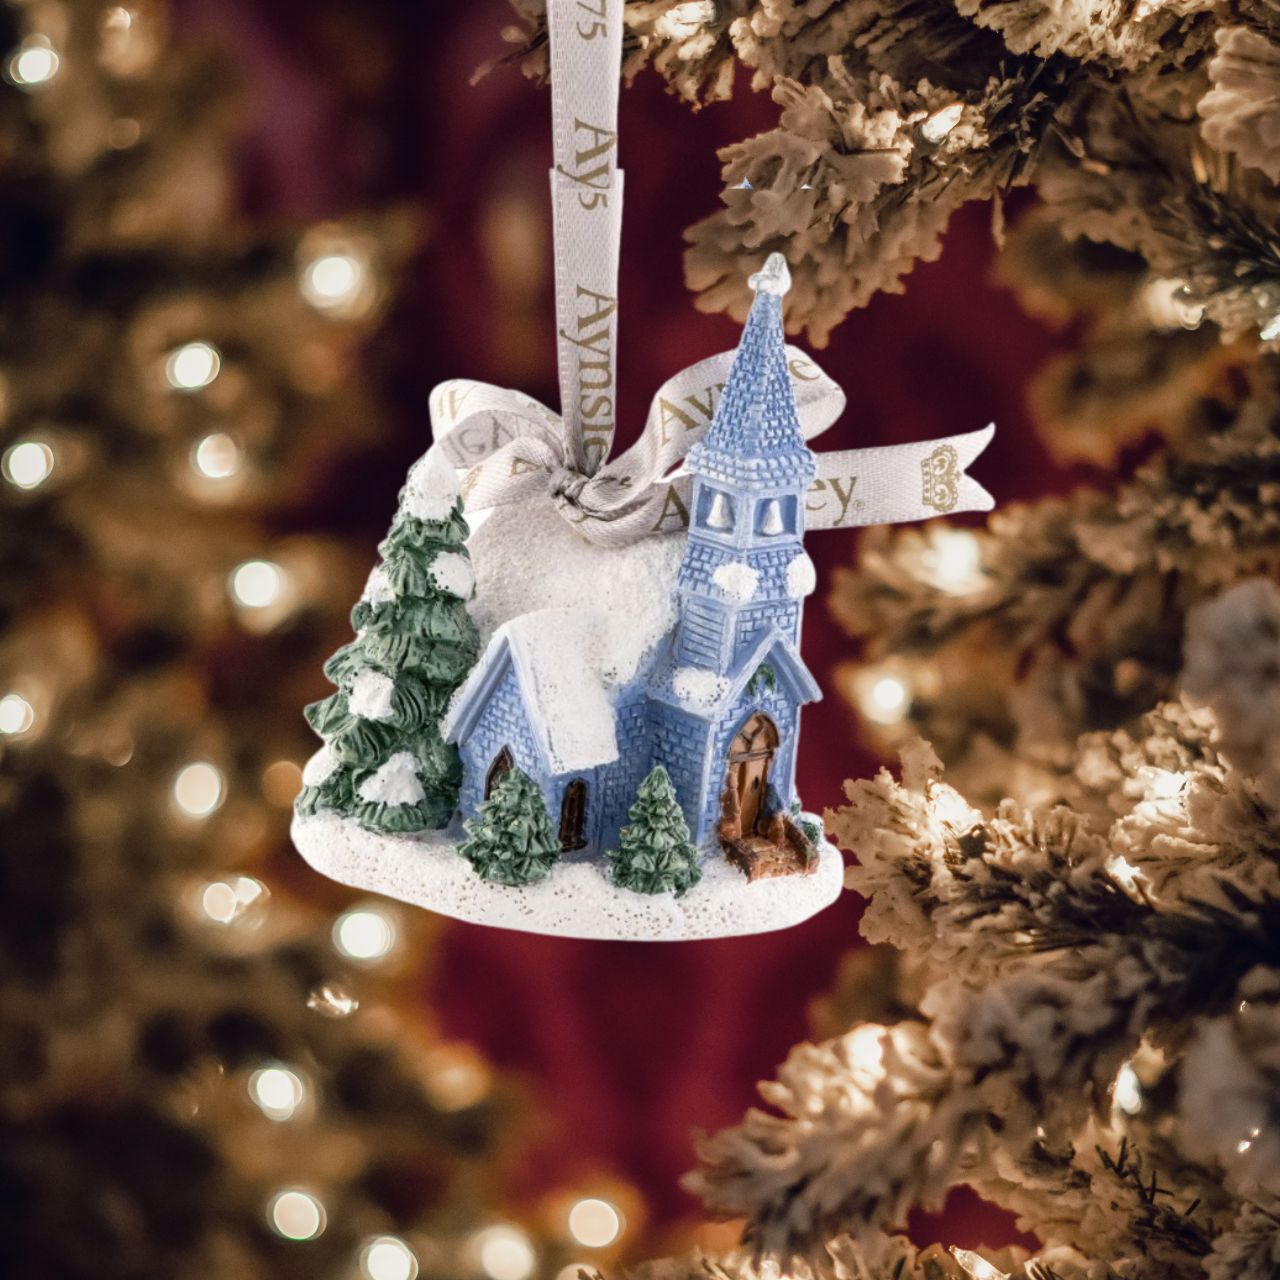 Church Hanging Christmas Ornament by Aynsley  The Christmas Church is a special ornament, and special place for many over the holiday season, midnight mass and meeting old friends.